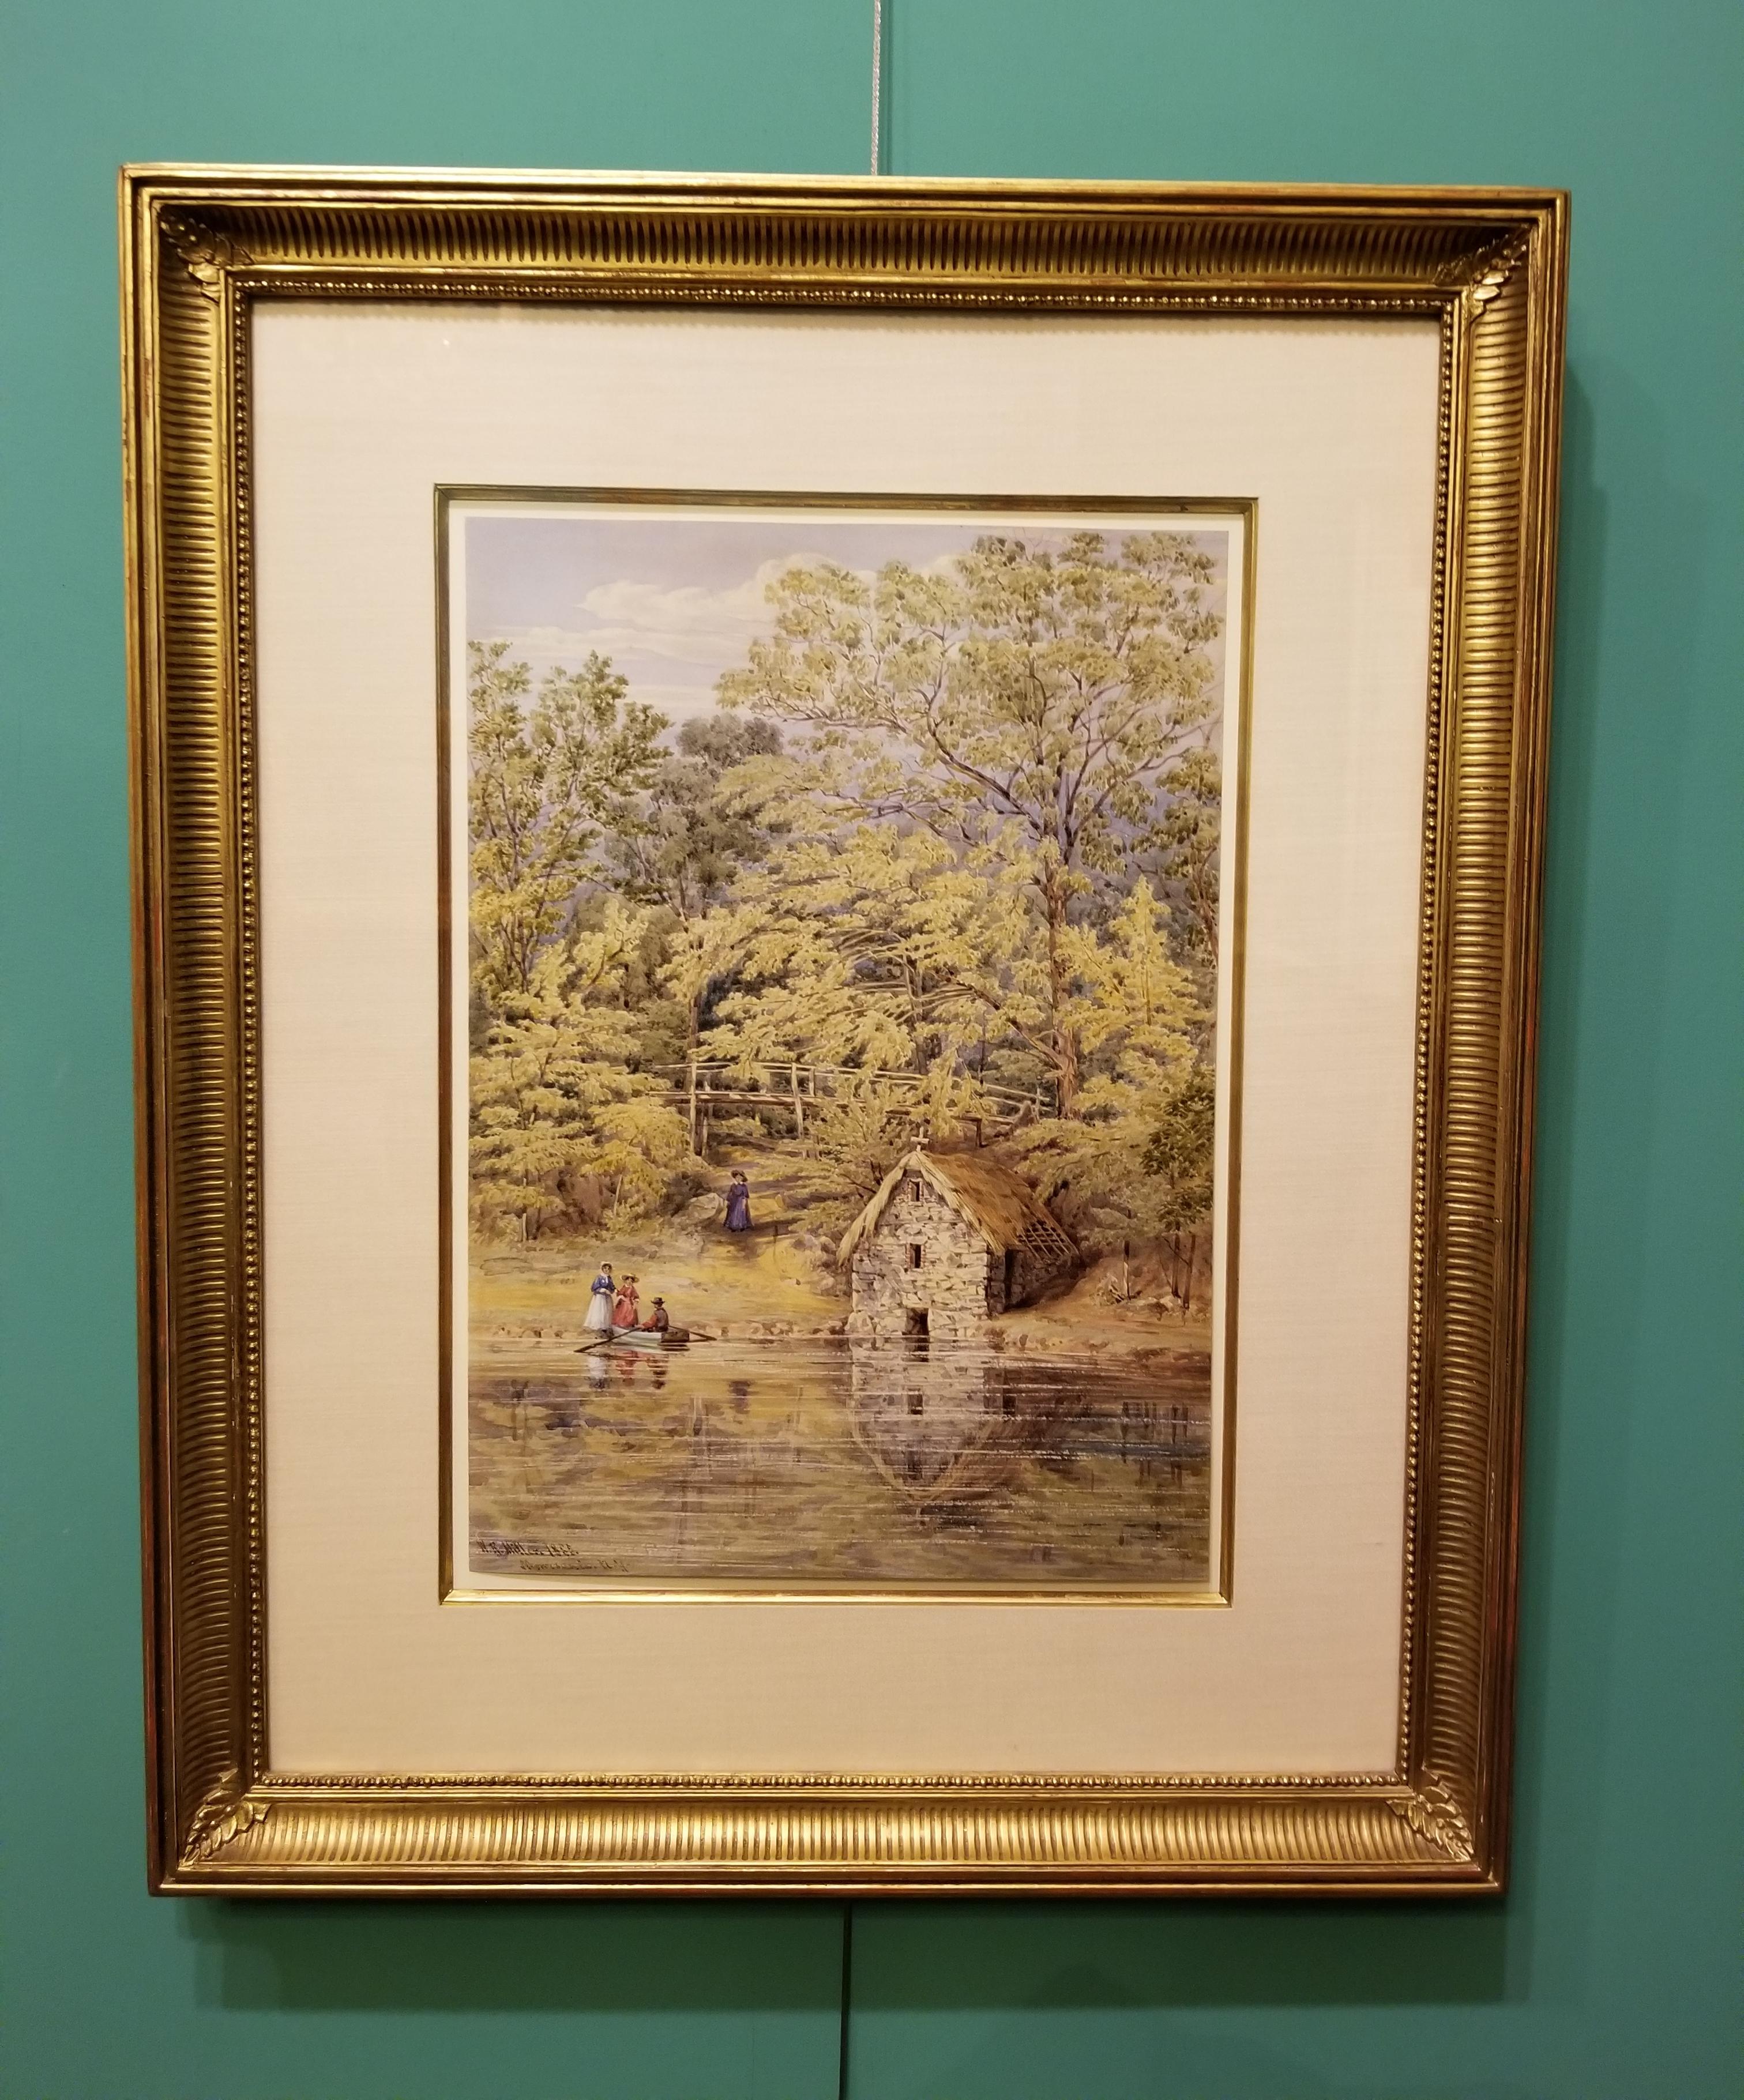 Morrisinia, New York in the Bronx - Painting by William Rickarby Miller